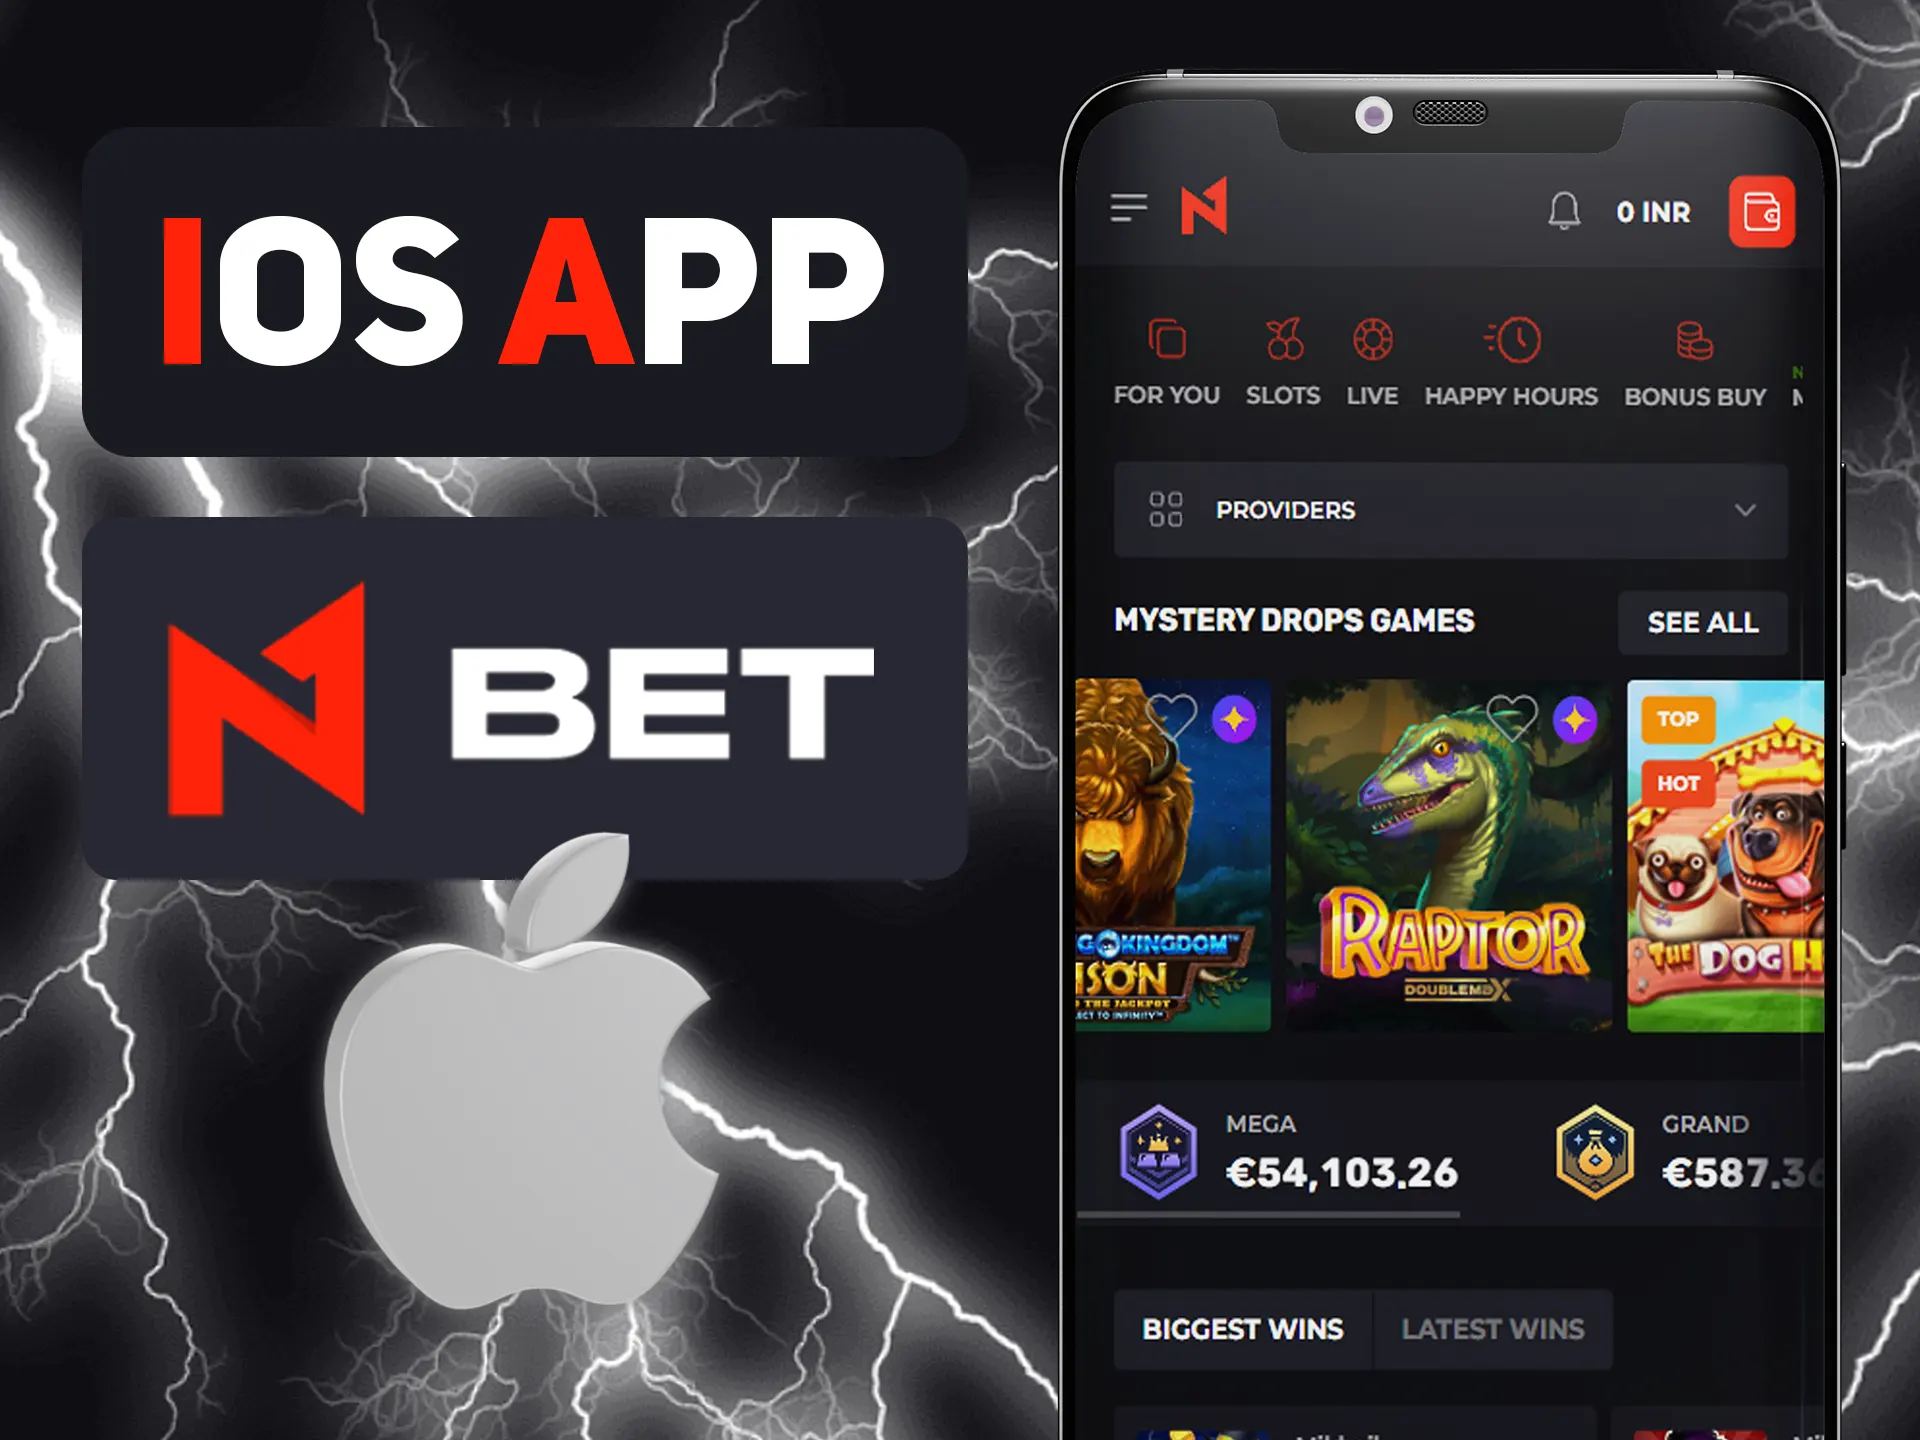 N1bet iOS app is great for making bets in any place.